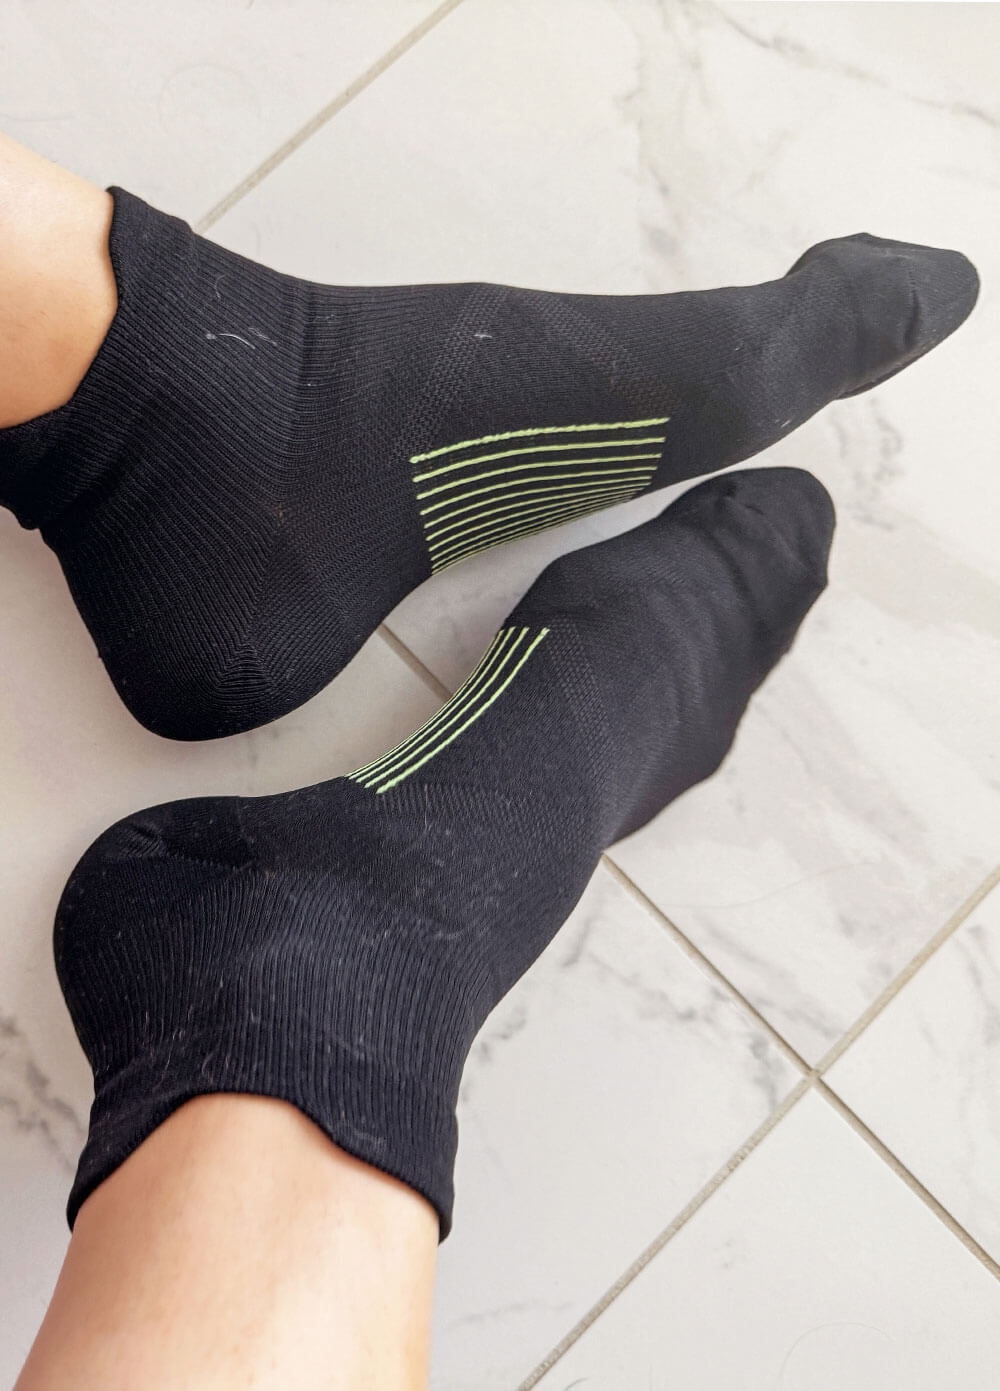 Mama Sox - Propel Sports Compression Ankle Socks in Black